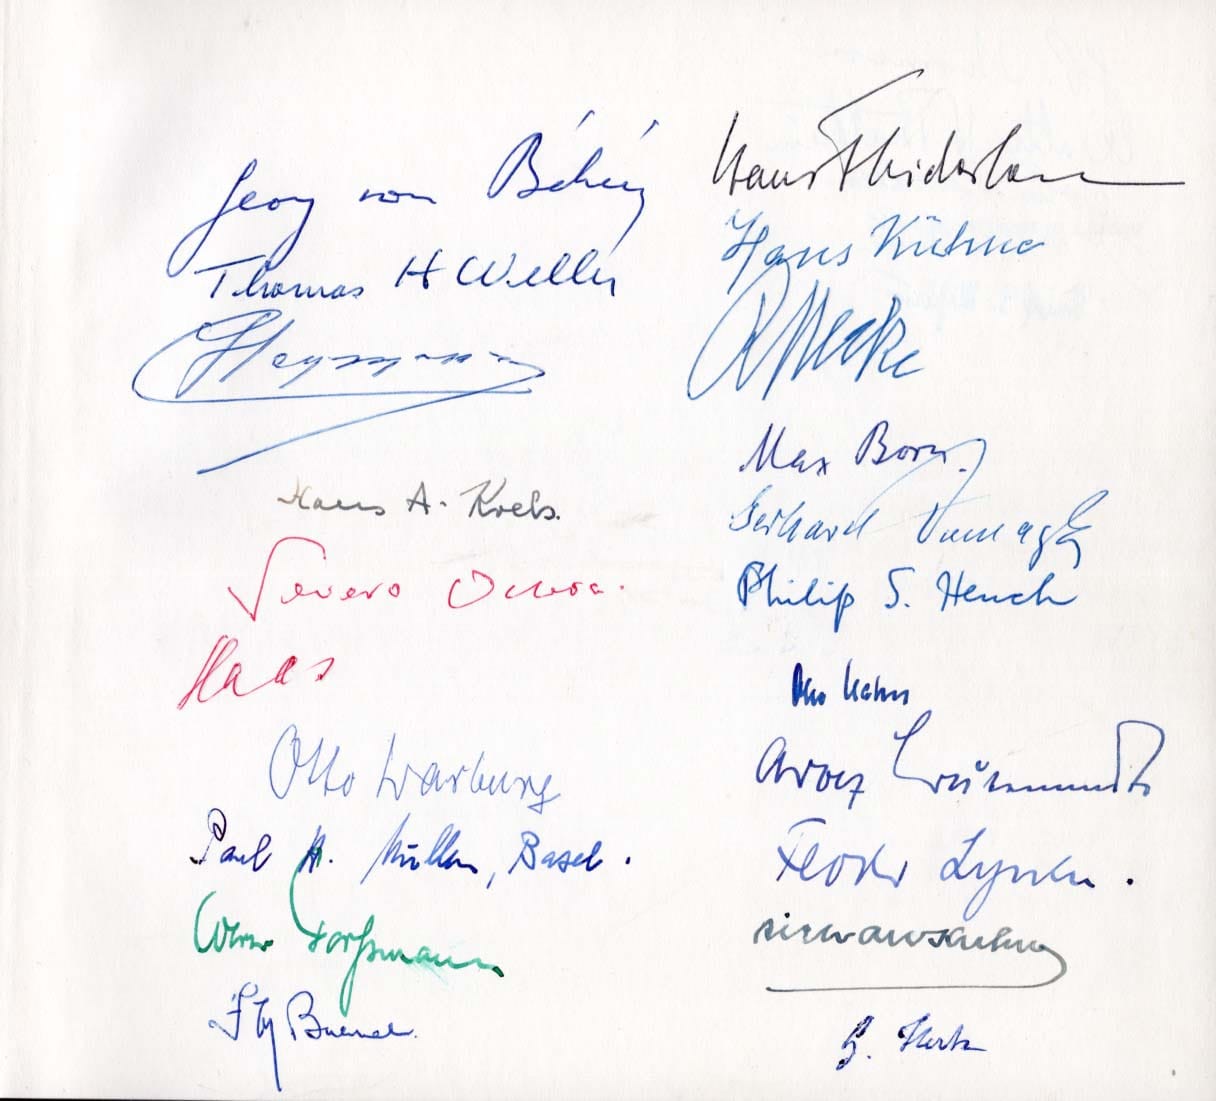 Max, Gerhard, Philip Showalter, Otto &amp; Others Born, Domagk, Hench, Hahn &amp; Others Autograph Autogramm | ID 8279231692949